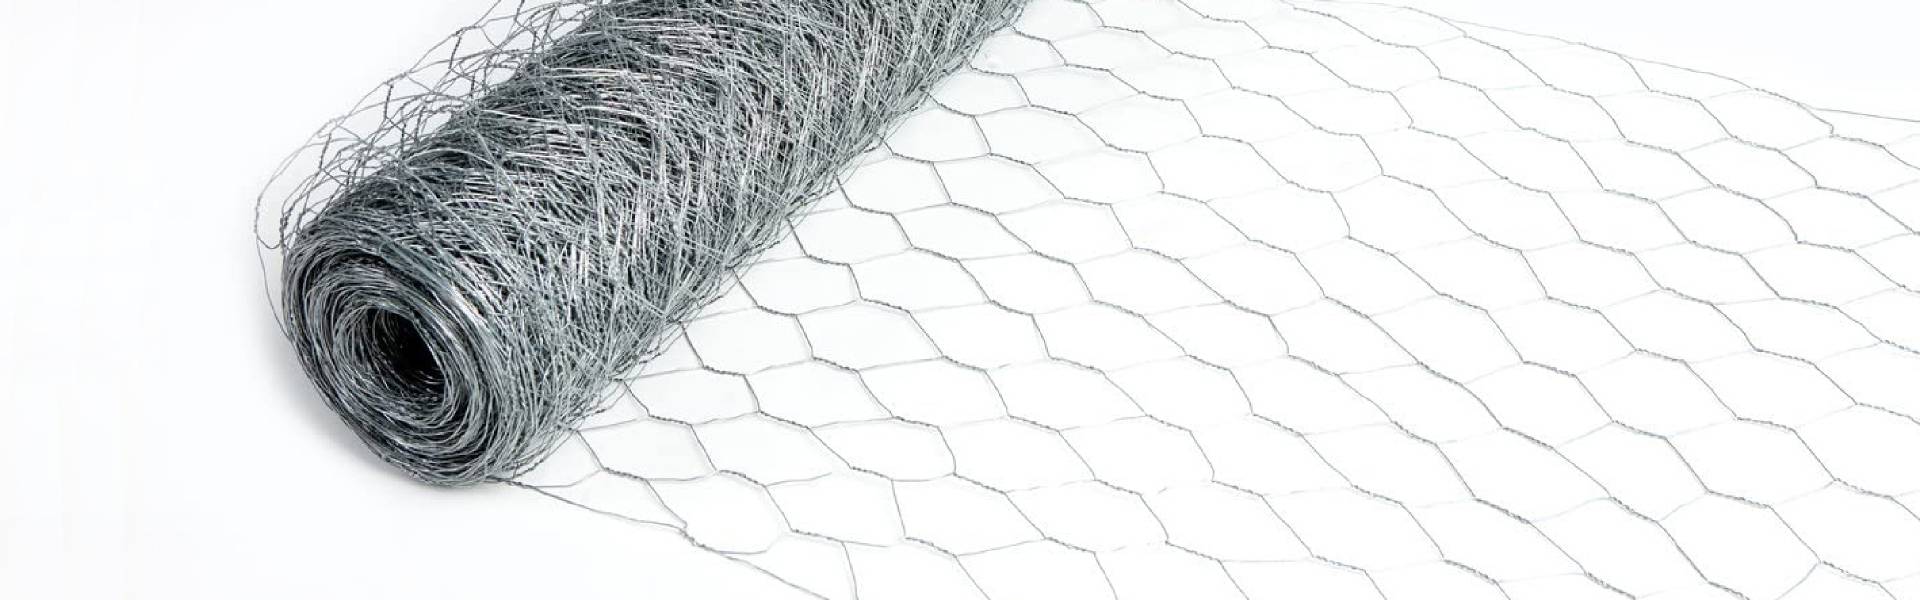 Plaster chicken wire fabric unrolls and shows the details of its mesh opening.